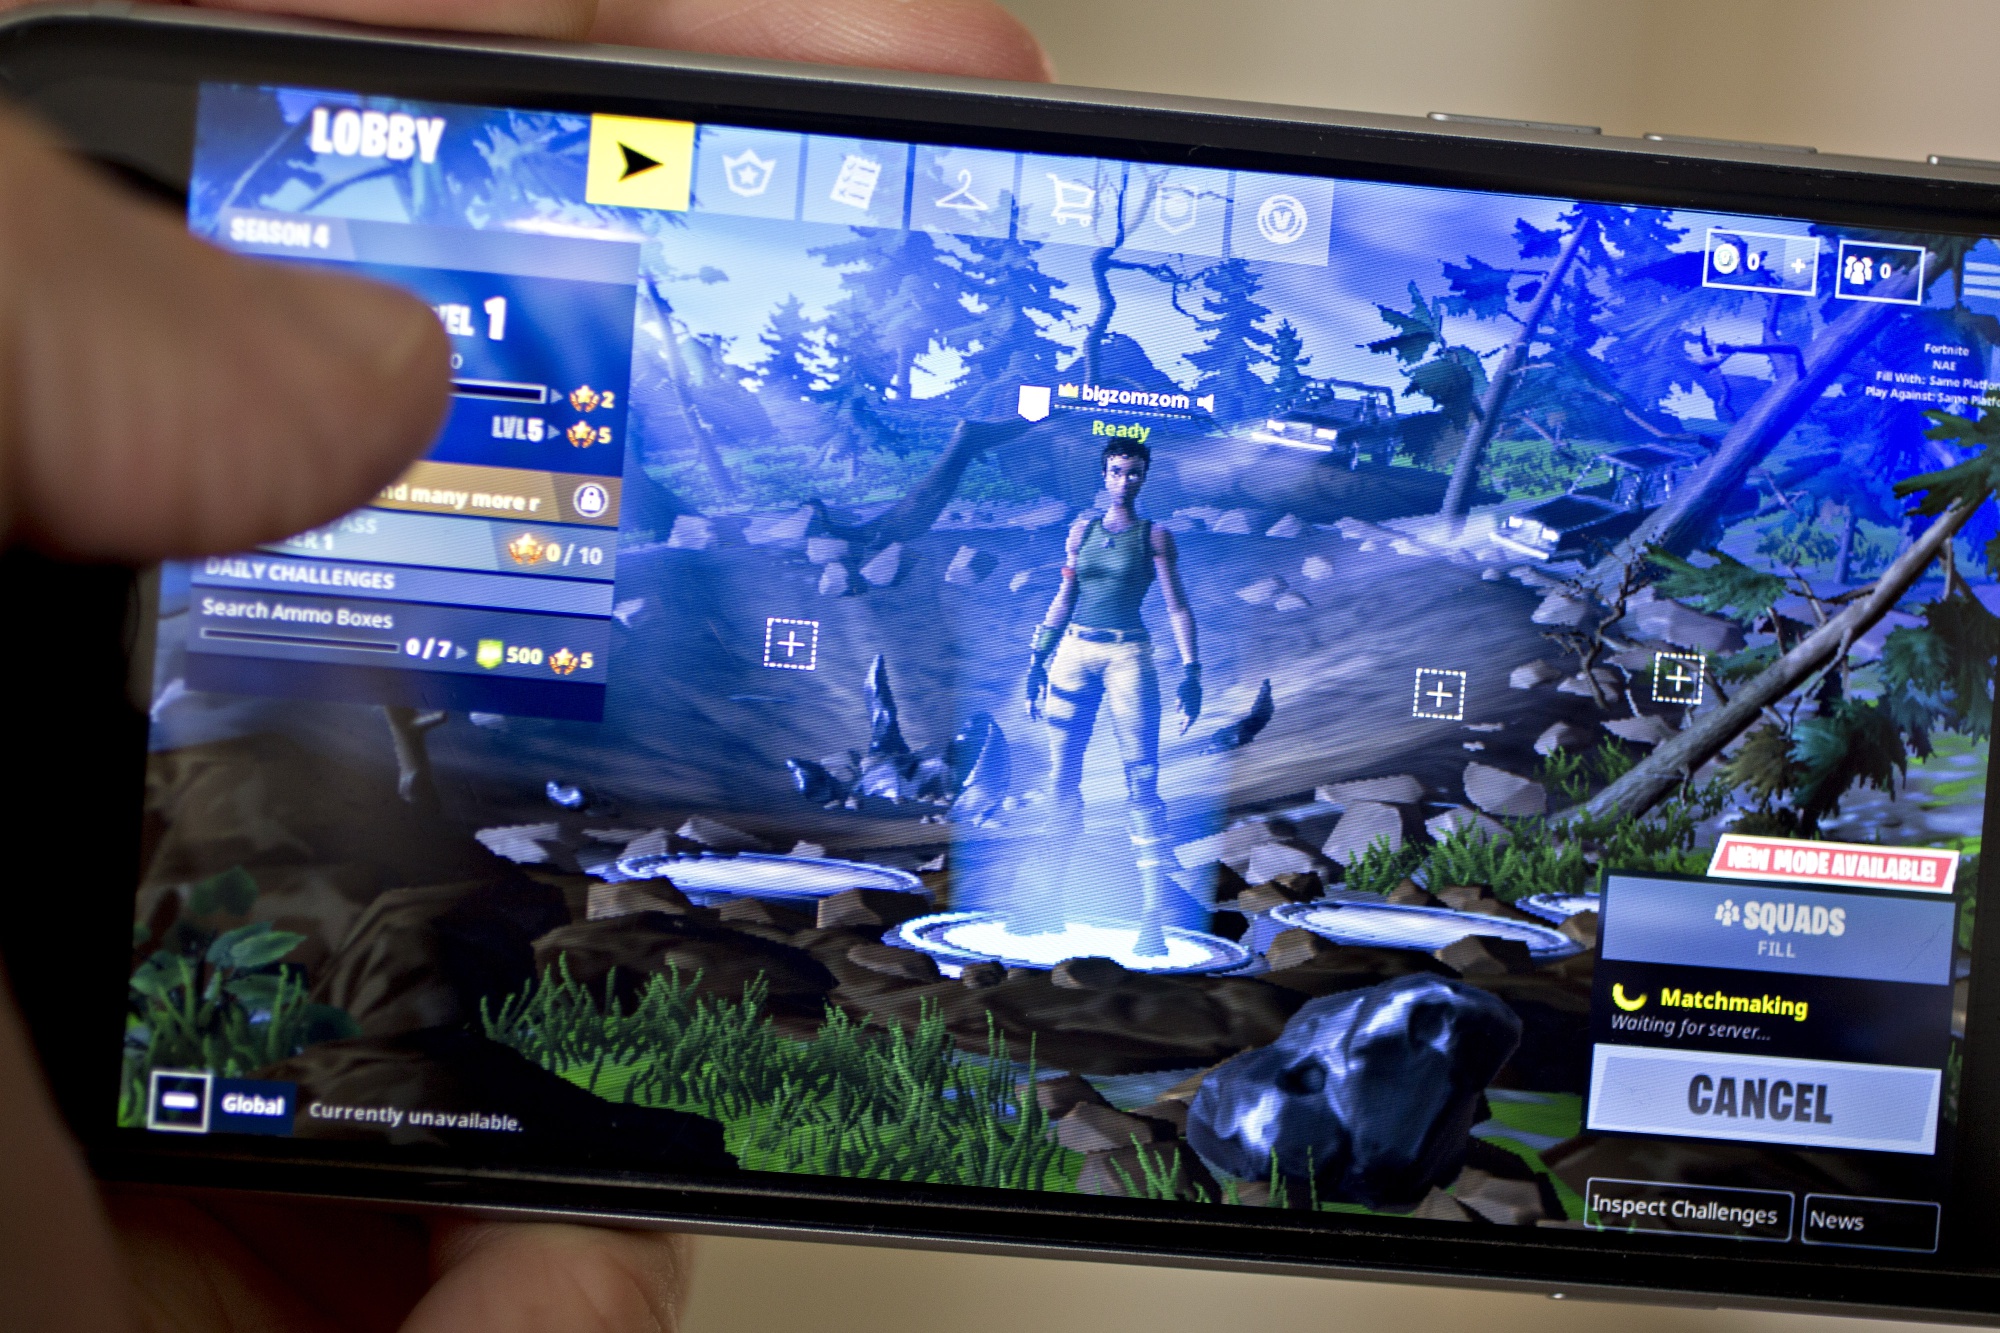 Epic Games wins support from 'Fortnite' gamers, firms on Apple standoff